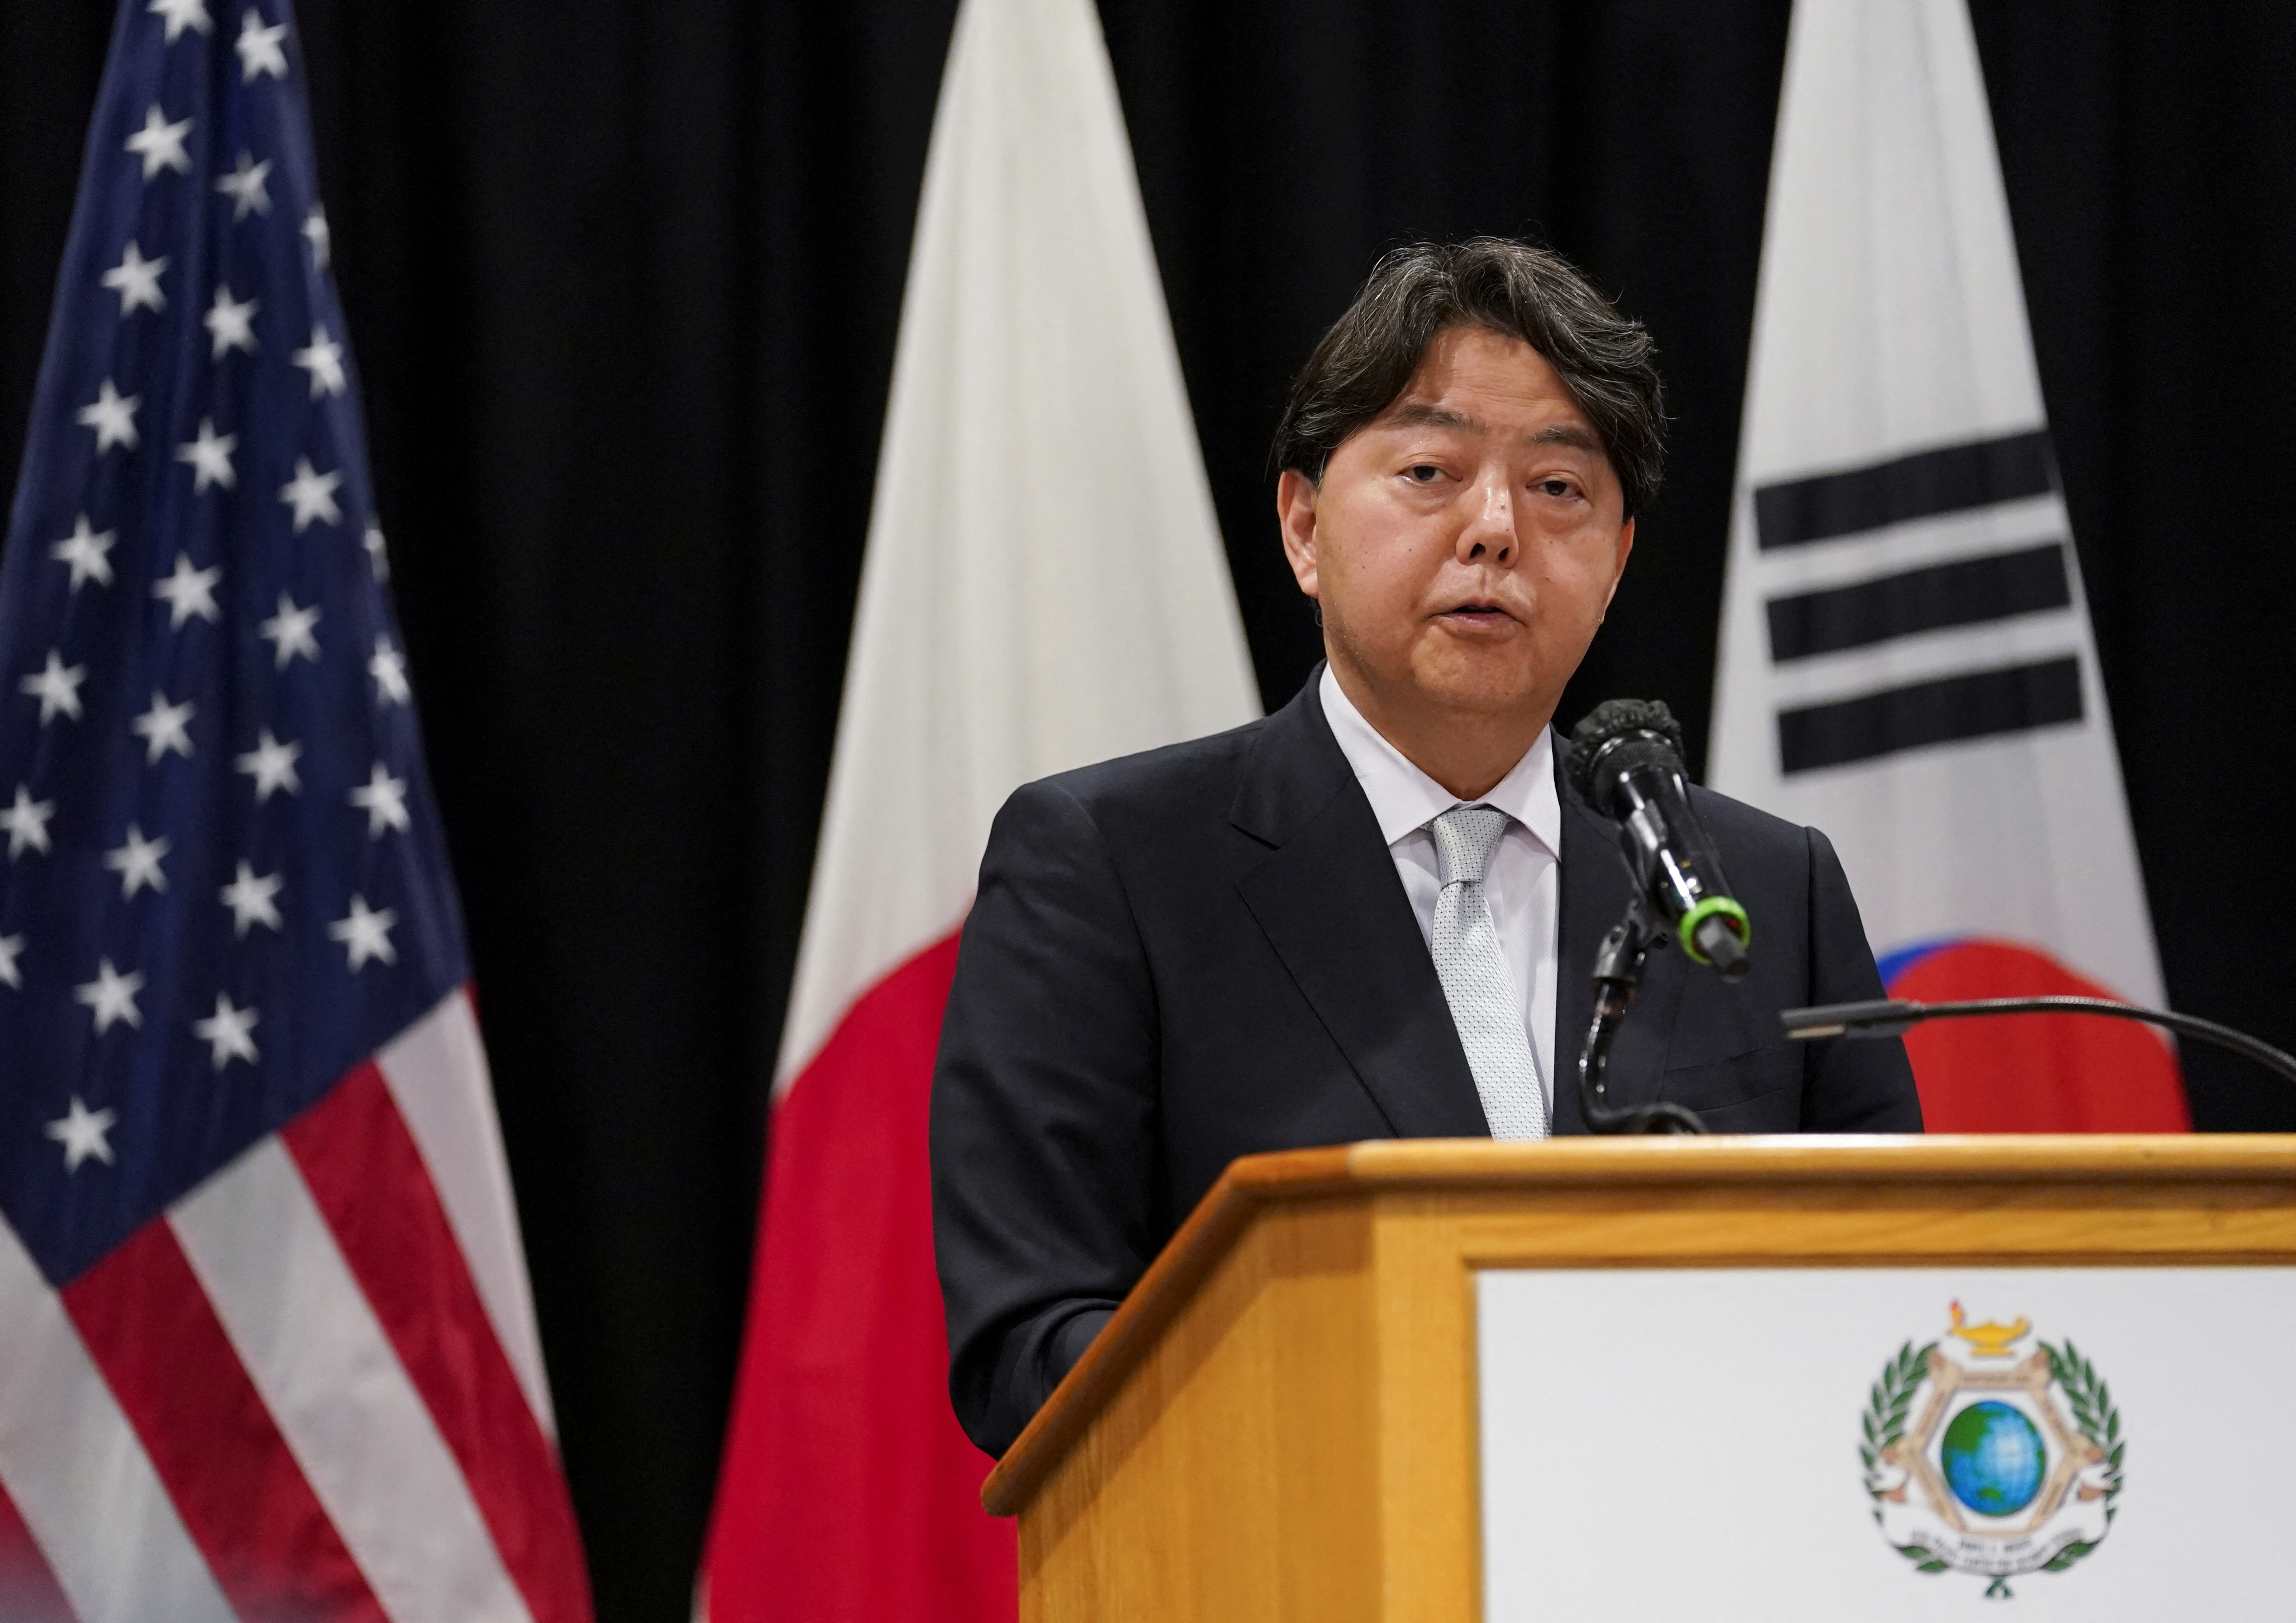 U.S. Secretary of State Antony Blinken, South Korean Foreign Minister Chung Eui-yong and Japanese Foreign Minister Yoshimasa Hayashi hold a joint press availability